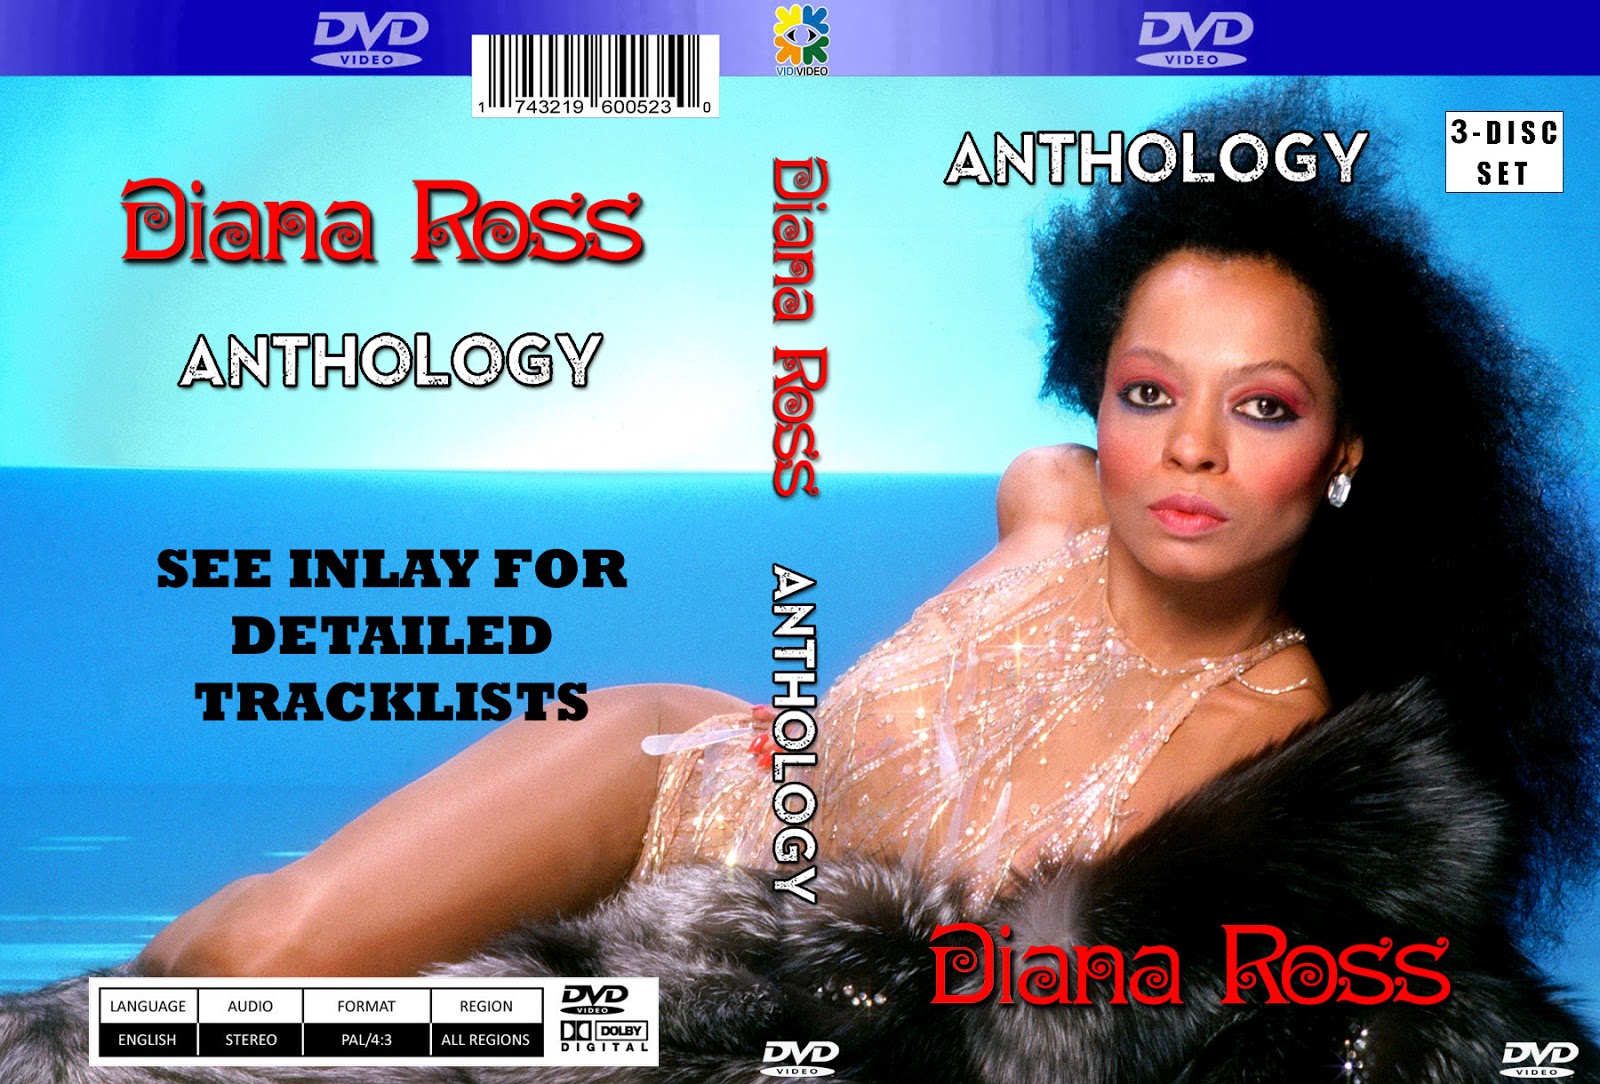 Music TV and Video Archives: DIANA ROSS on DVD. 